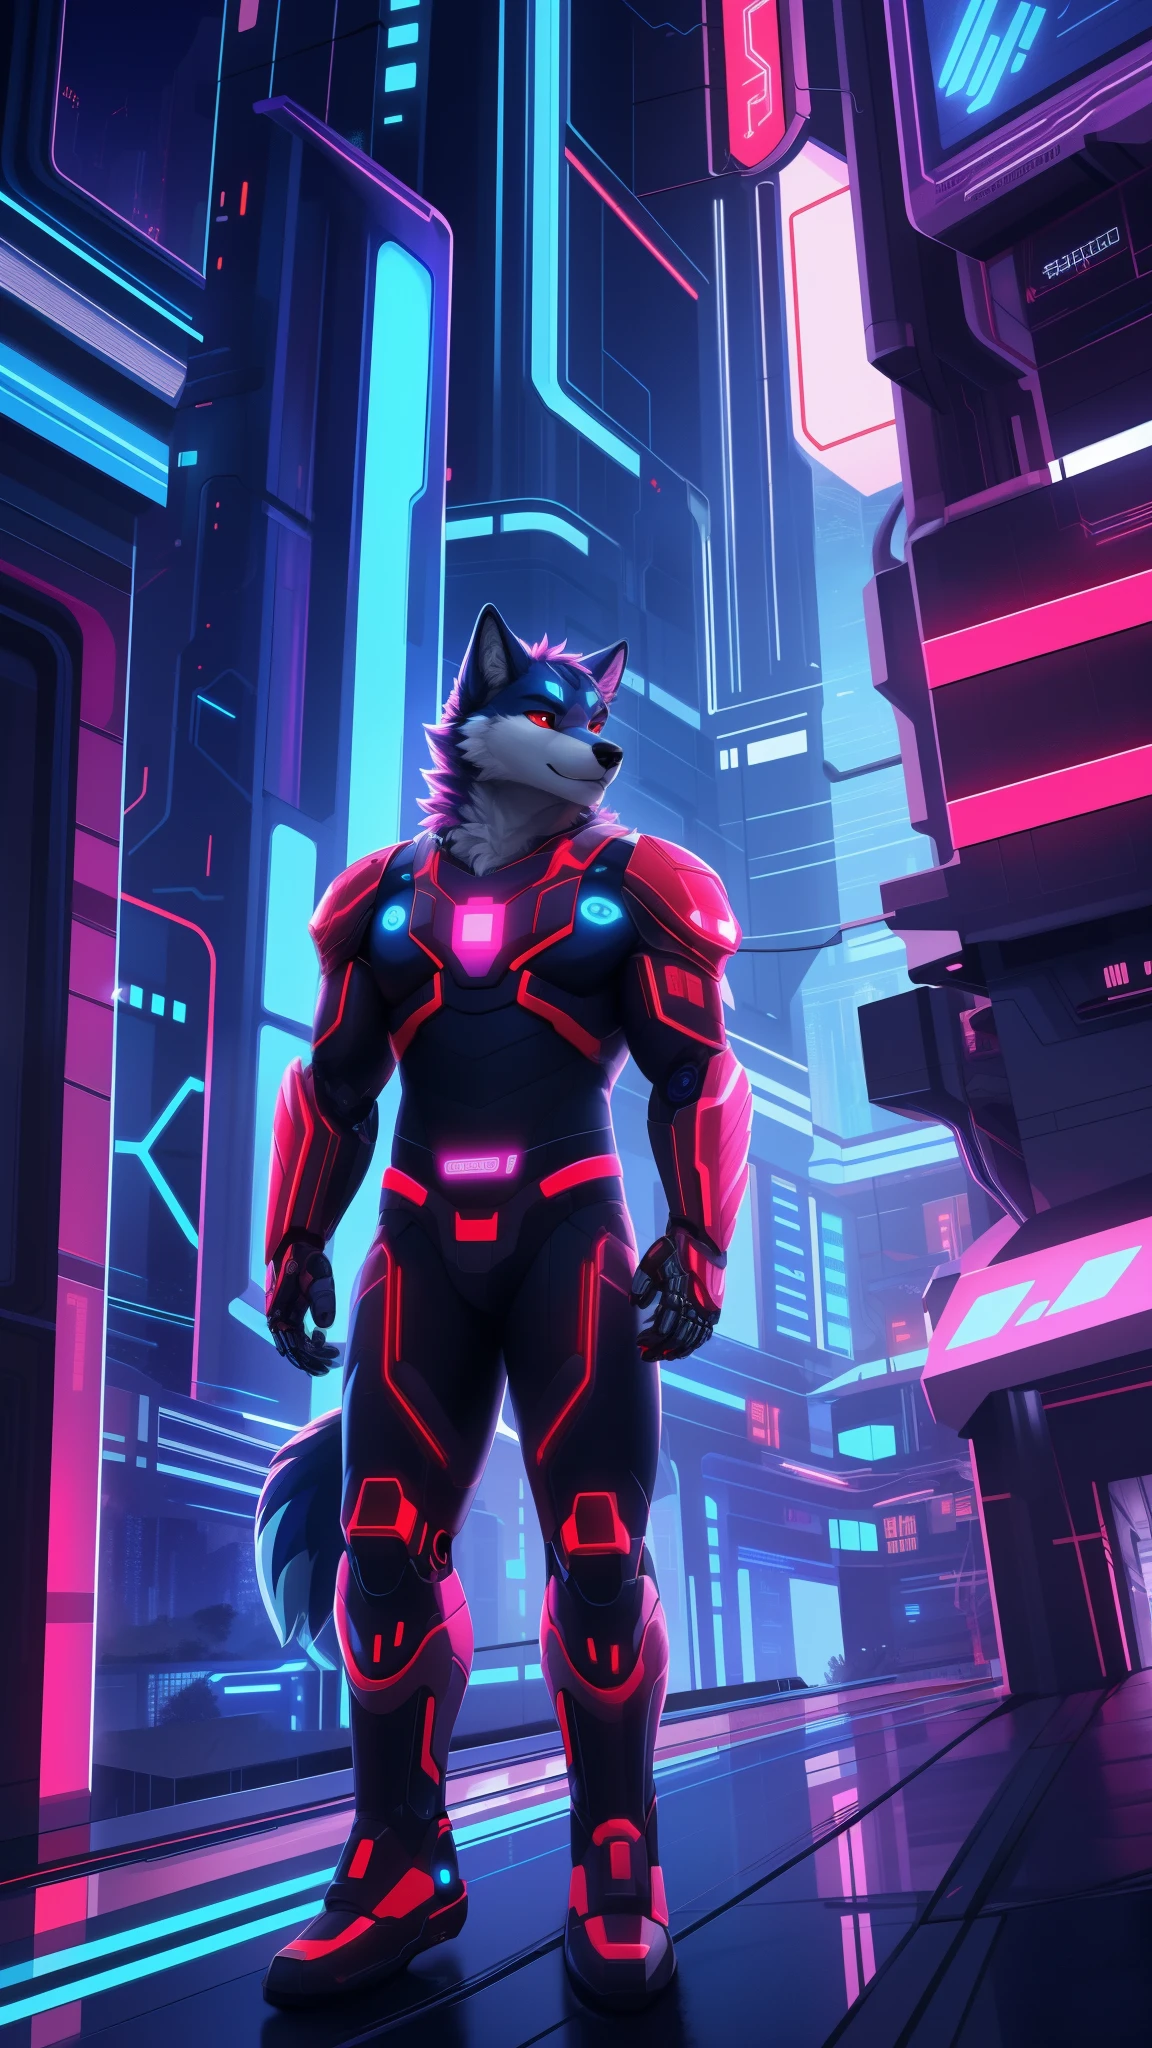 (best quality,highres:1.2),digital art,wolf character with red eyes,cyborg golden armor,anthropomorphic,detailed fur,city of the future in the background,glowing neon lights,futuristic architecture,contrasting colors,mechanical elements,high-tech atmosphere